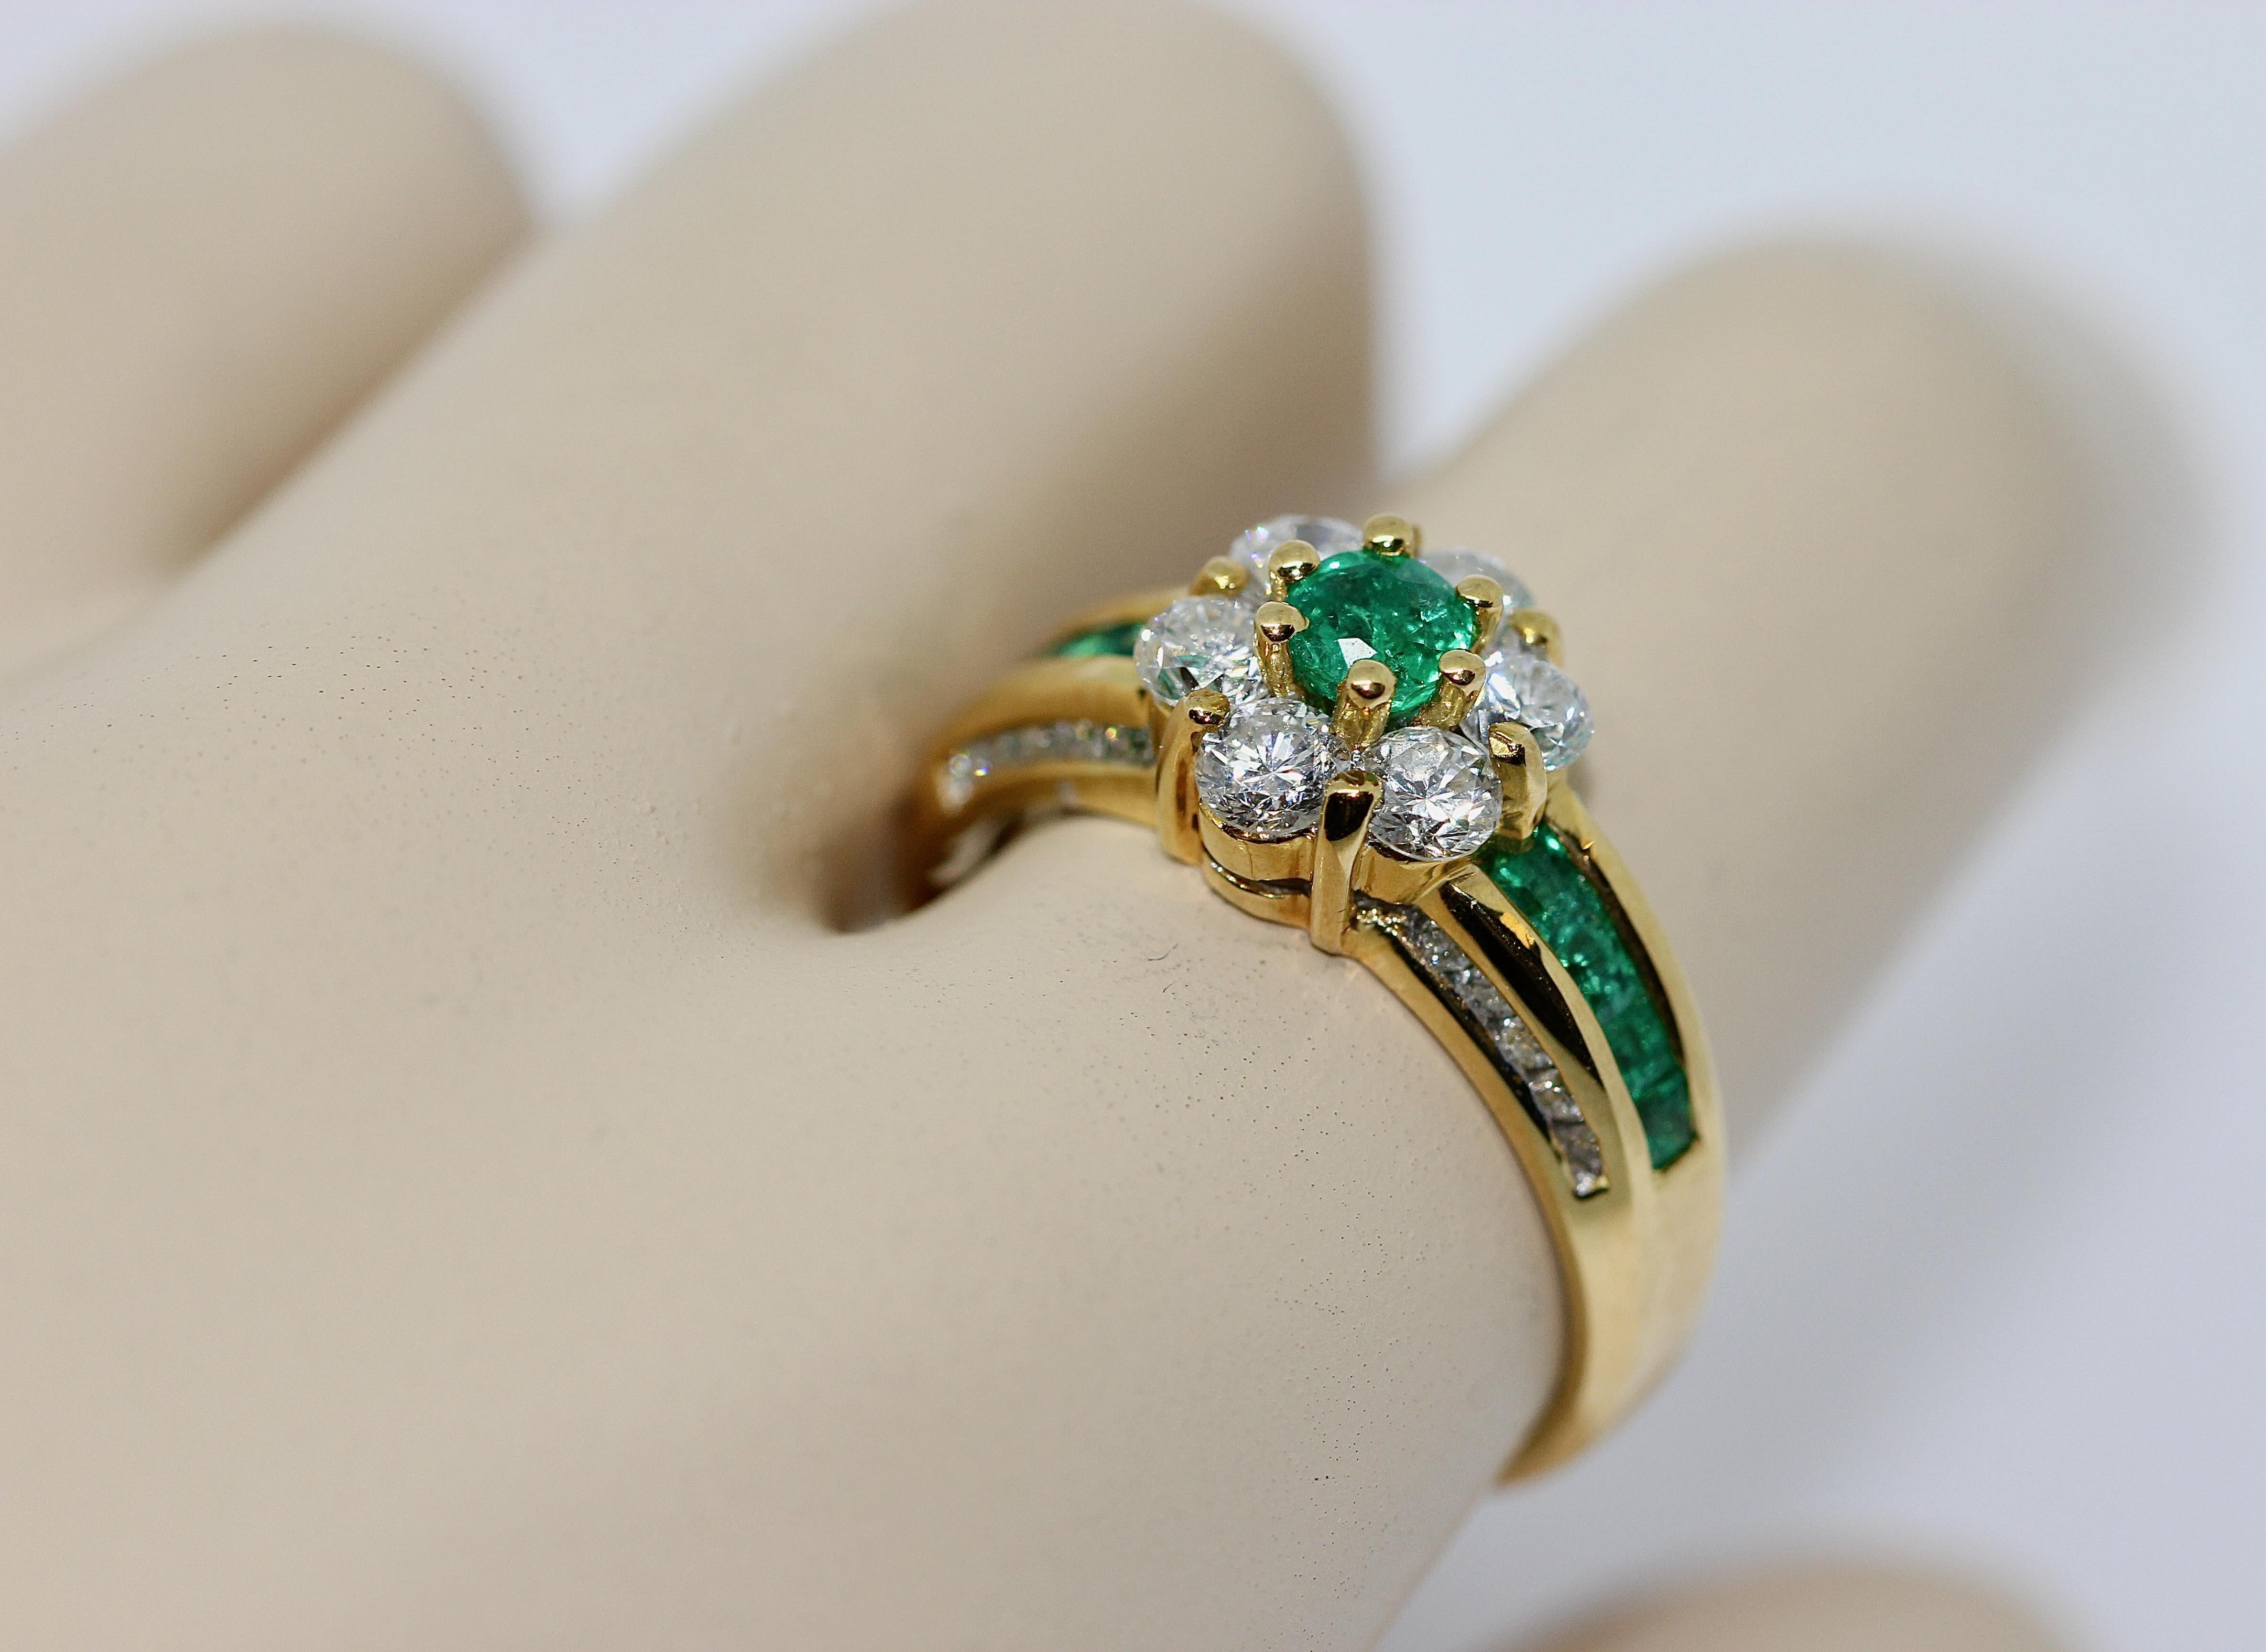 18 Karat Gold Ladies Ring set with Diamonds and Emeralds.

Unique piece of jewelry from the traditional Swiss company TÜRLER.

The ring is set with 26 diamonds, of very good quality and a total weight of 1.03 carat.
Emeralds total weight approx. 0.7